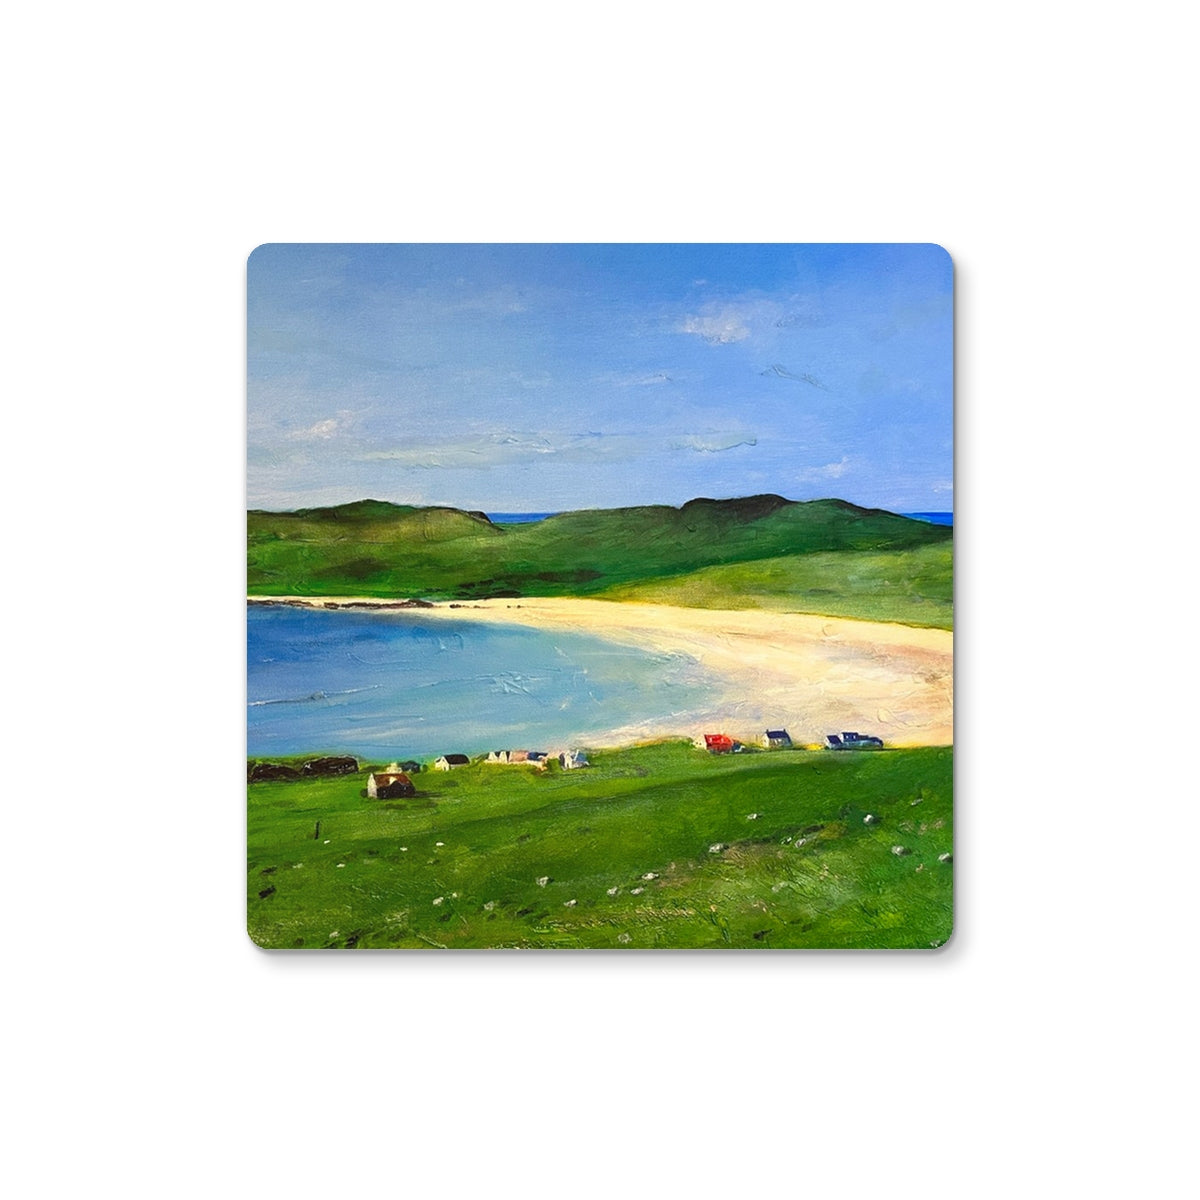 Balephuil Beach Tiree Art Gifts Coaster-Coasters-Hebridean Islands Art Gallery-2 Coasters-Paintings, Prints, Homeware, Art Gifts From Scotland By Scottish Artist Kevin Hunter